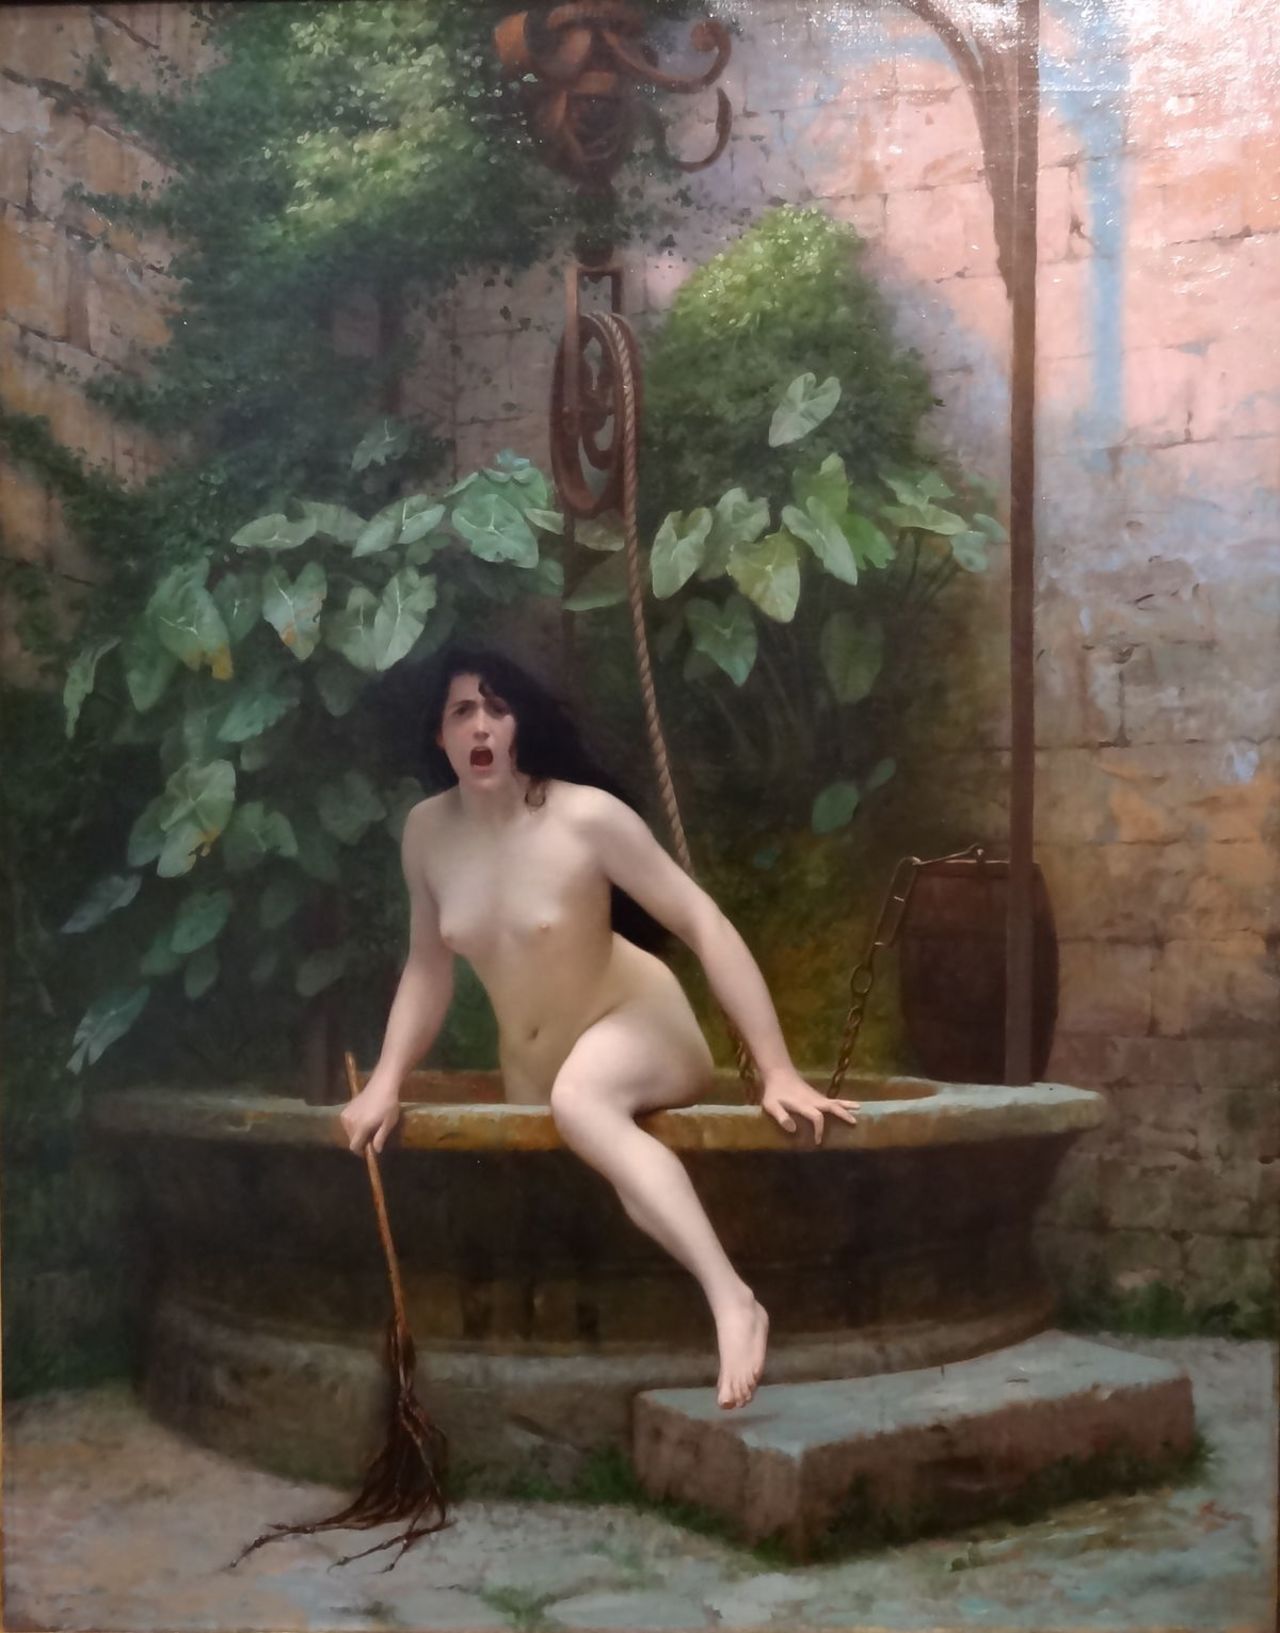 "Truth Coming Out of Her Well to Shame Mankind" (1896) by Jean-Léon Gérôme